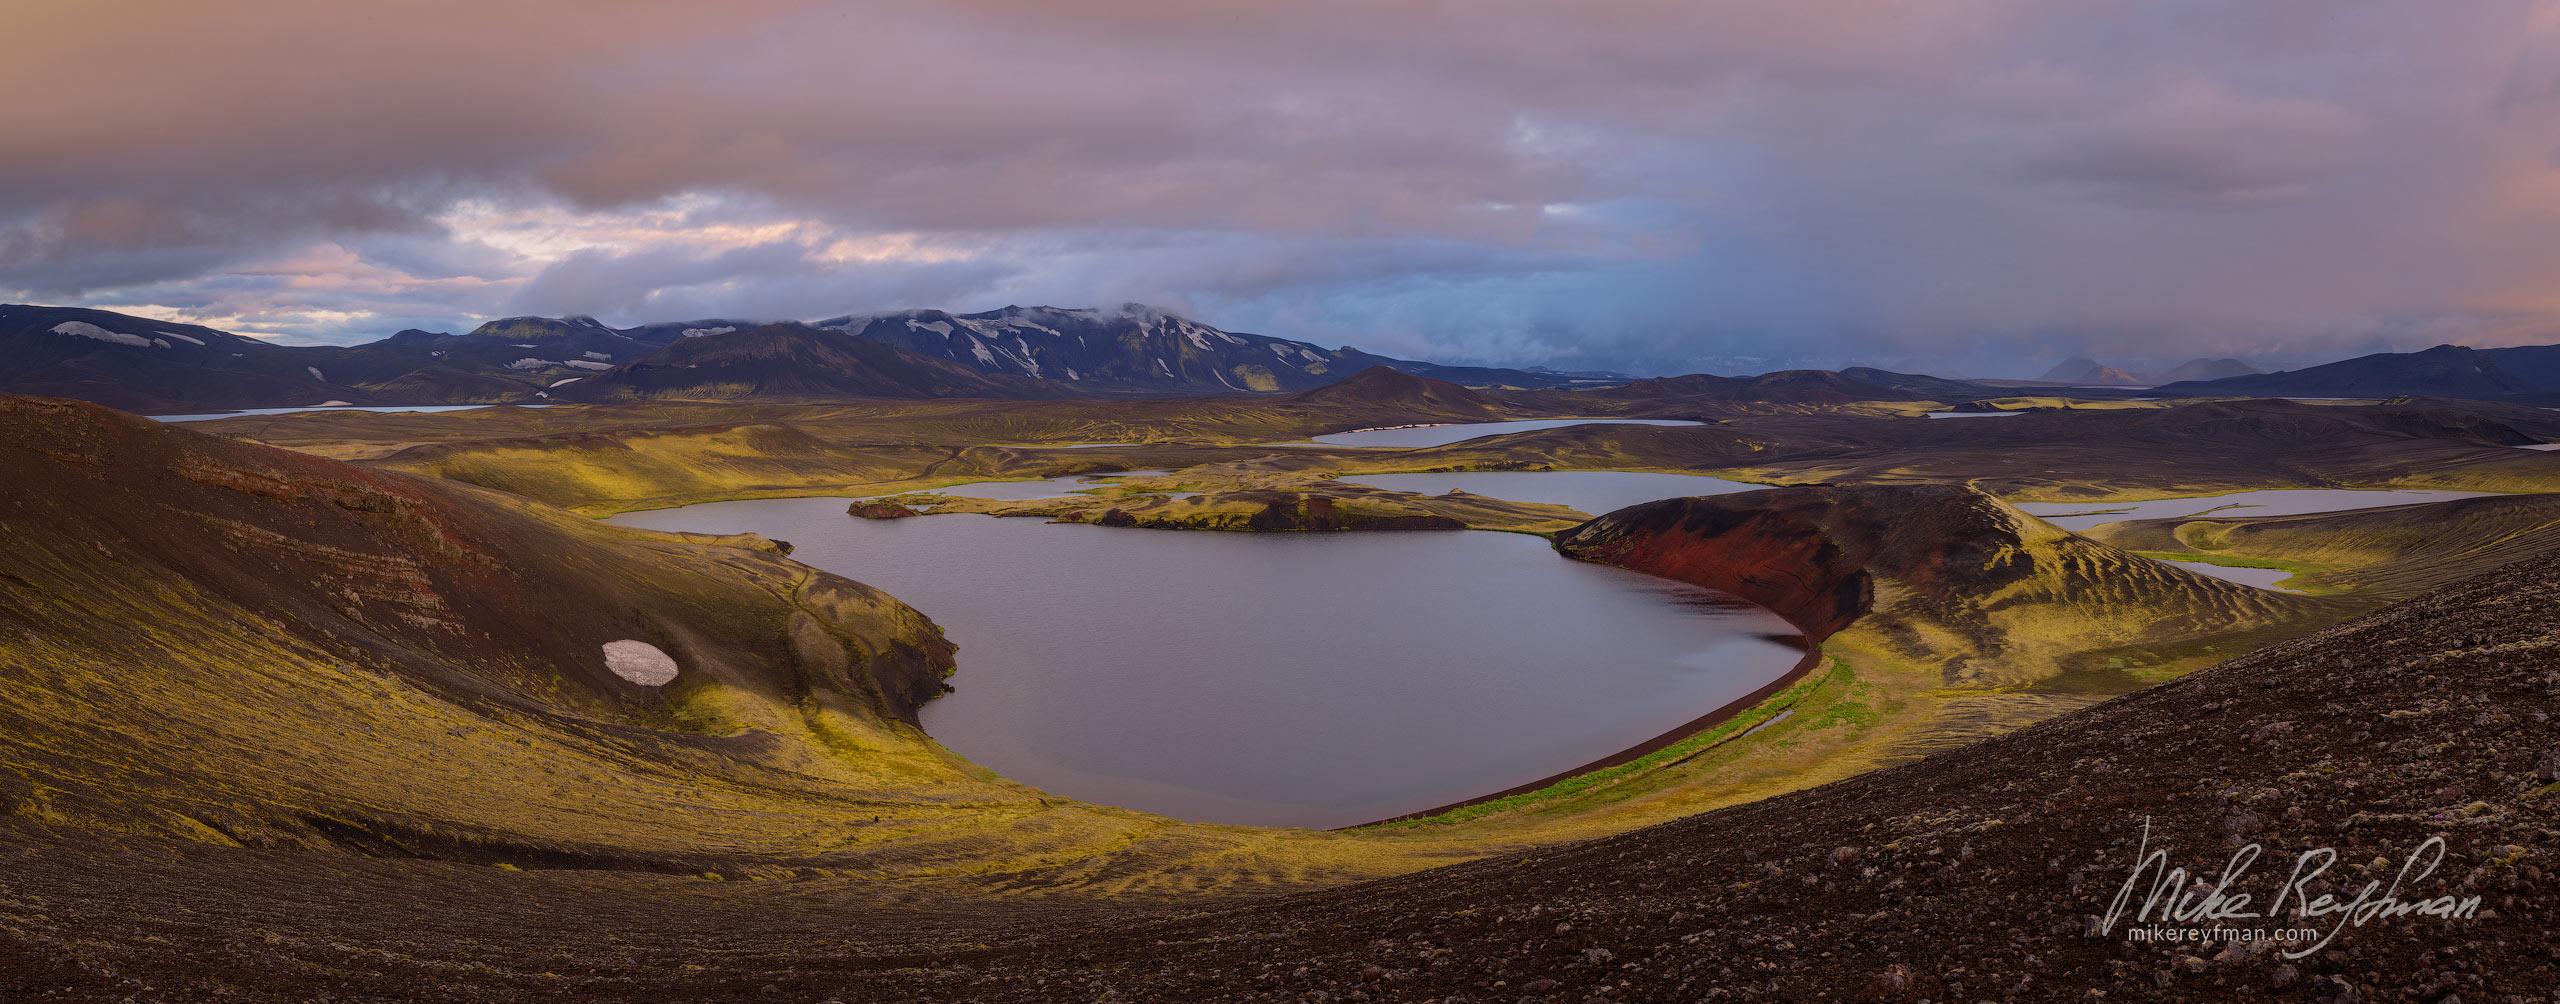 Crater lakes in the Veidivotn area. Central Highlands, Iceland. 069-IC-GP _D8B4397_Pano-1x2.55 - Rhyolite Mountains, Crater Lakes, Geothermal Areas, Lava Fields and Glacial Rivers. Iceland.  - Mike Reyfman Photography